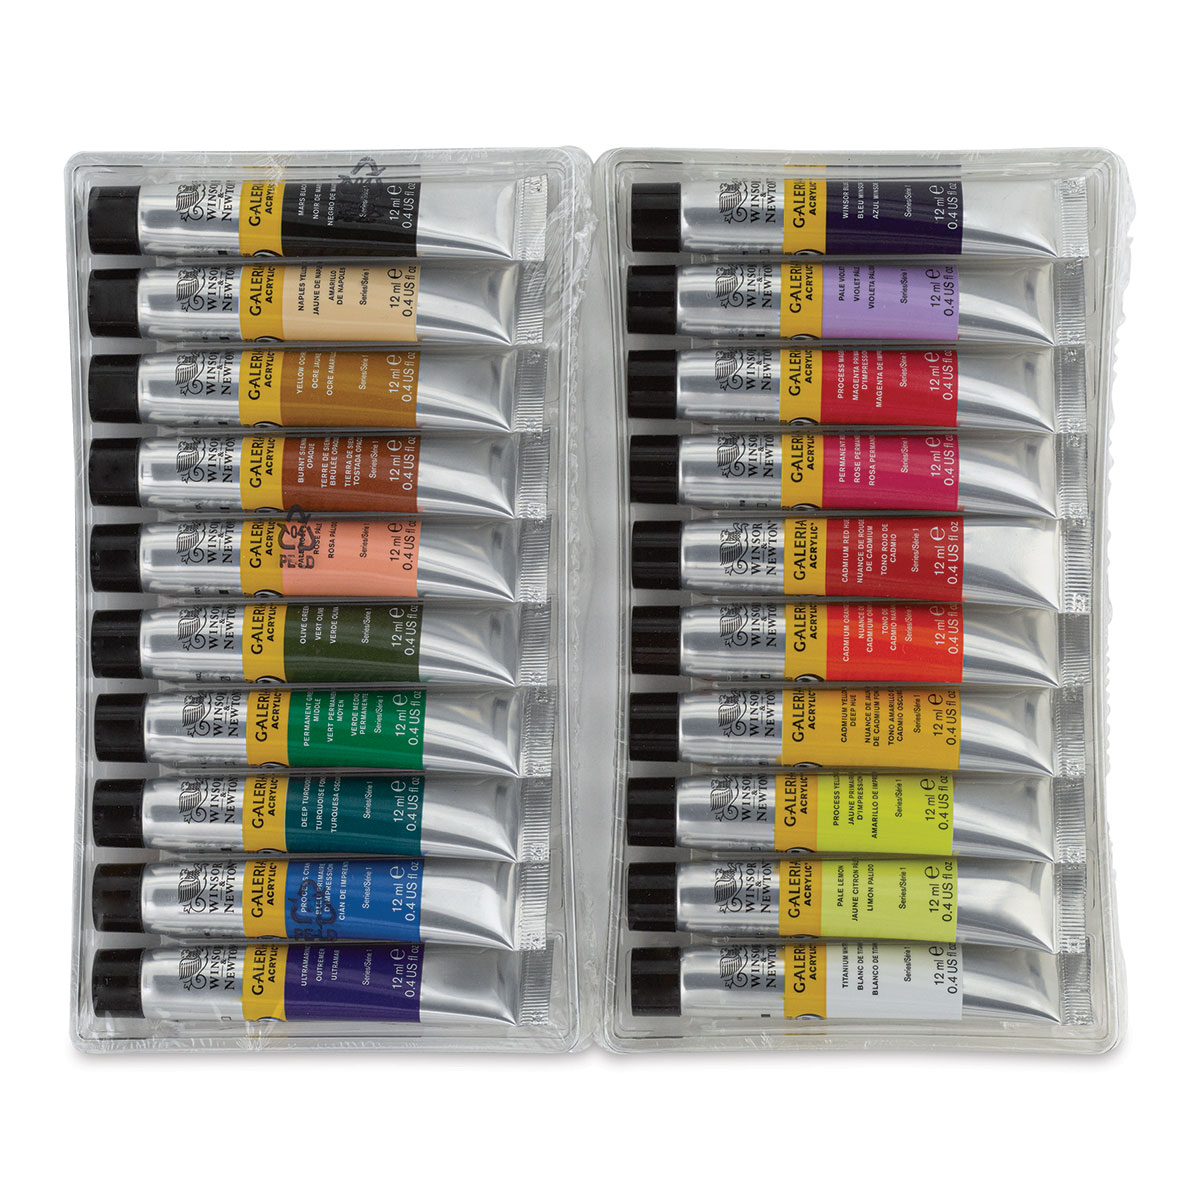 Winsor & Newton Galeria Acrylic paint  PaperStory - The Great Little Art  Shop